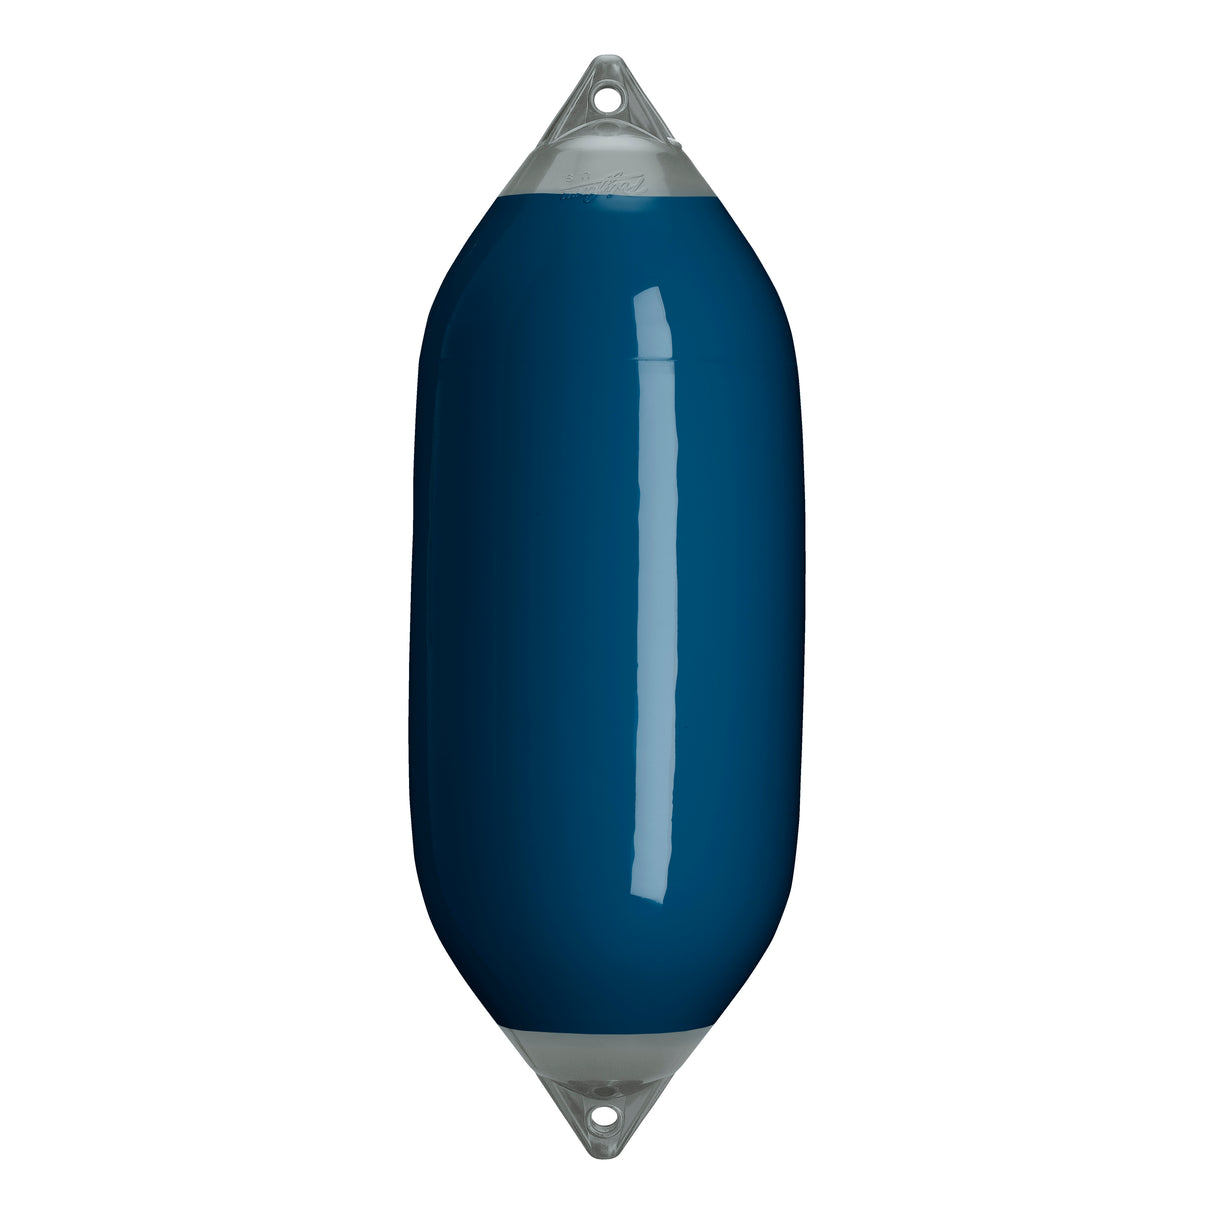 Catalina Blue boat fender with Grey-Top, Polyform F-7